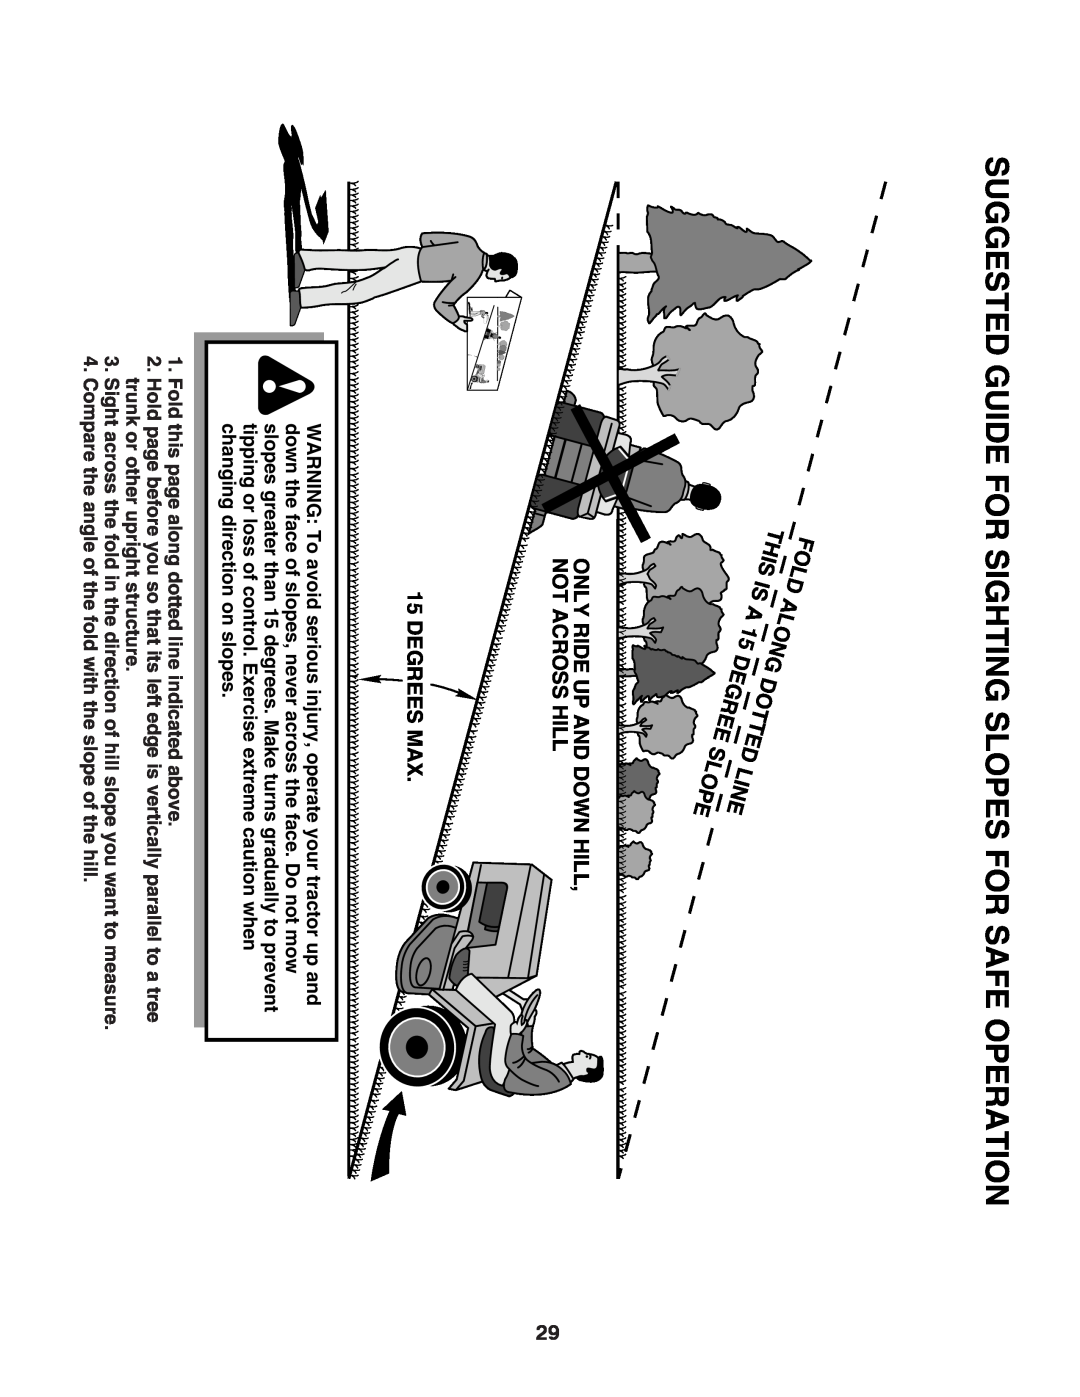 Poulan 96018000400, 532 43 88-98 manual Suggested Guide For Sighting Slopes For Safe Operation 